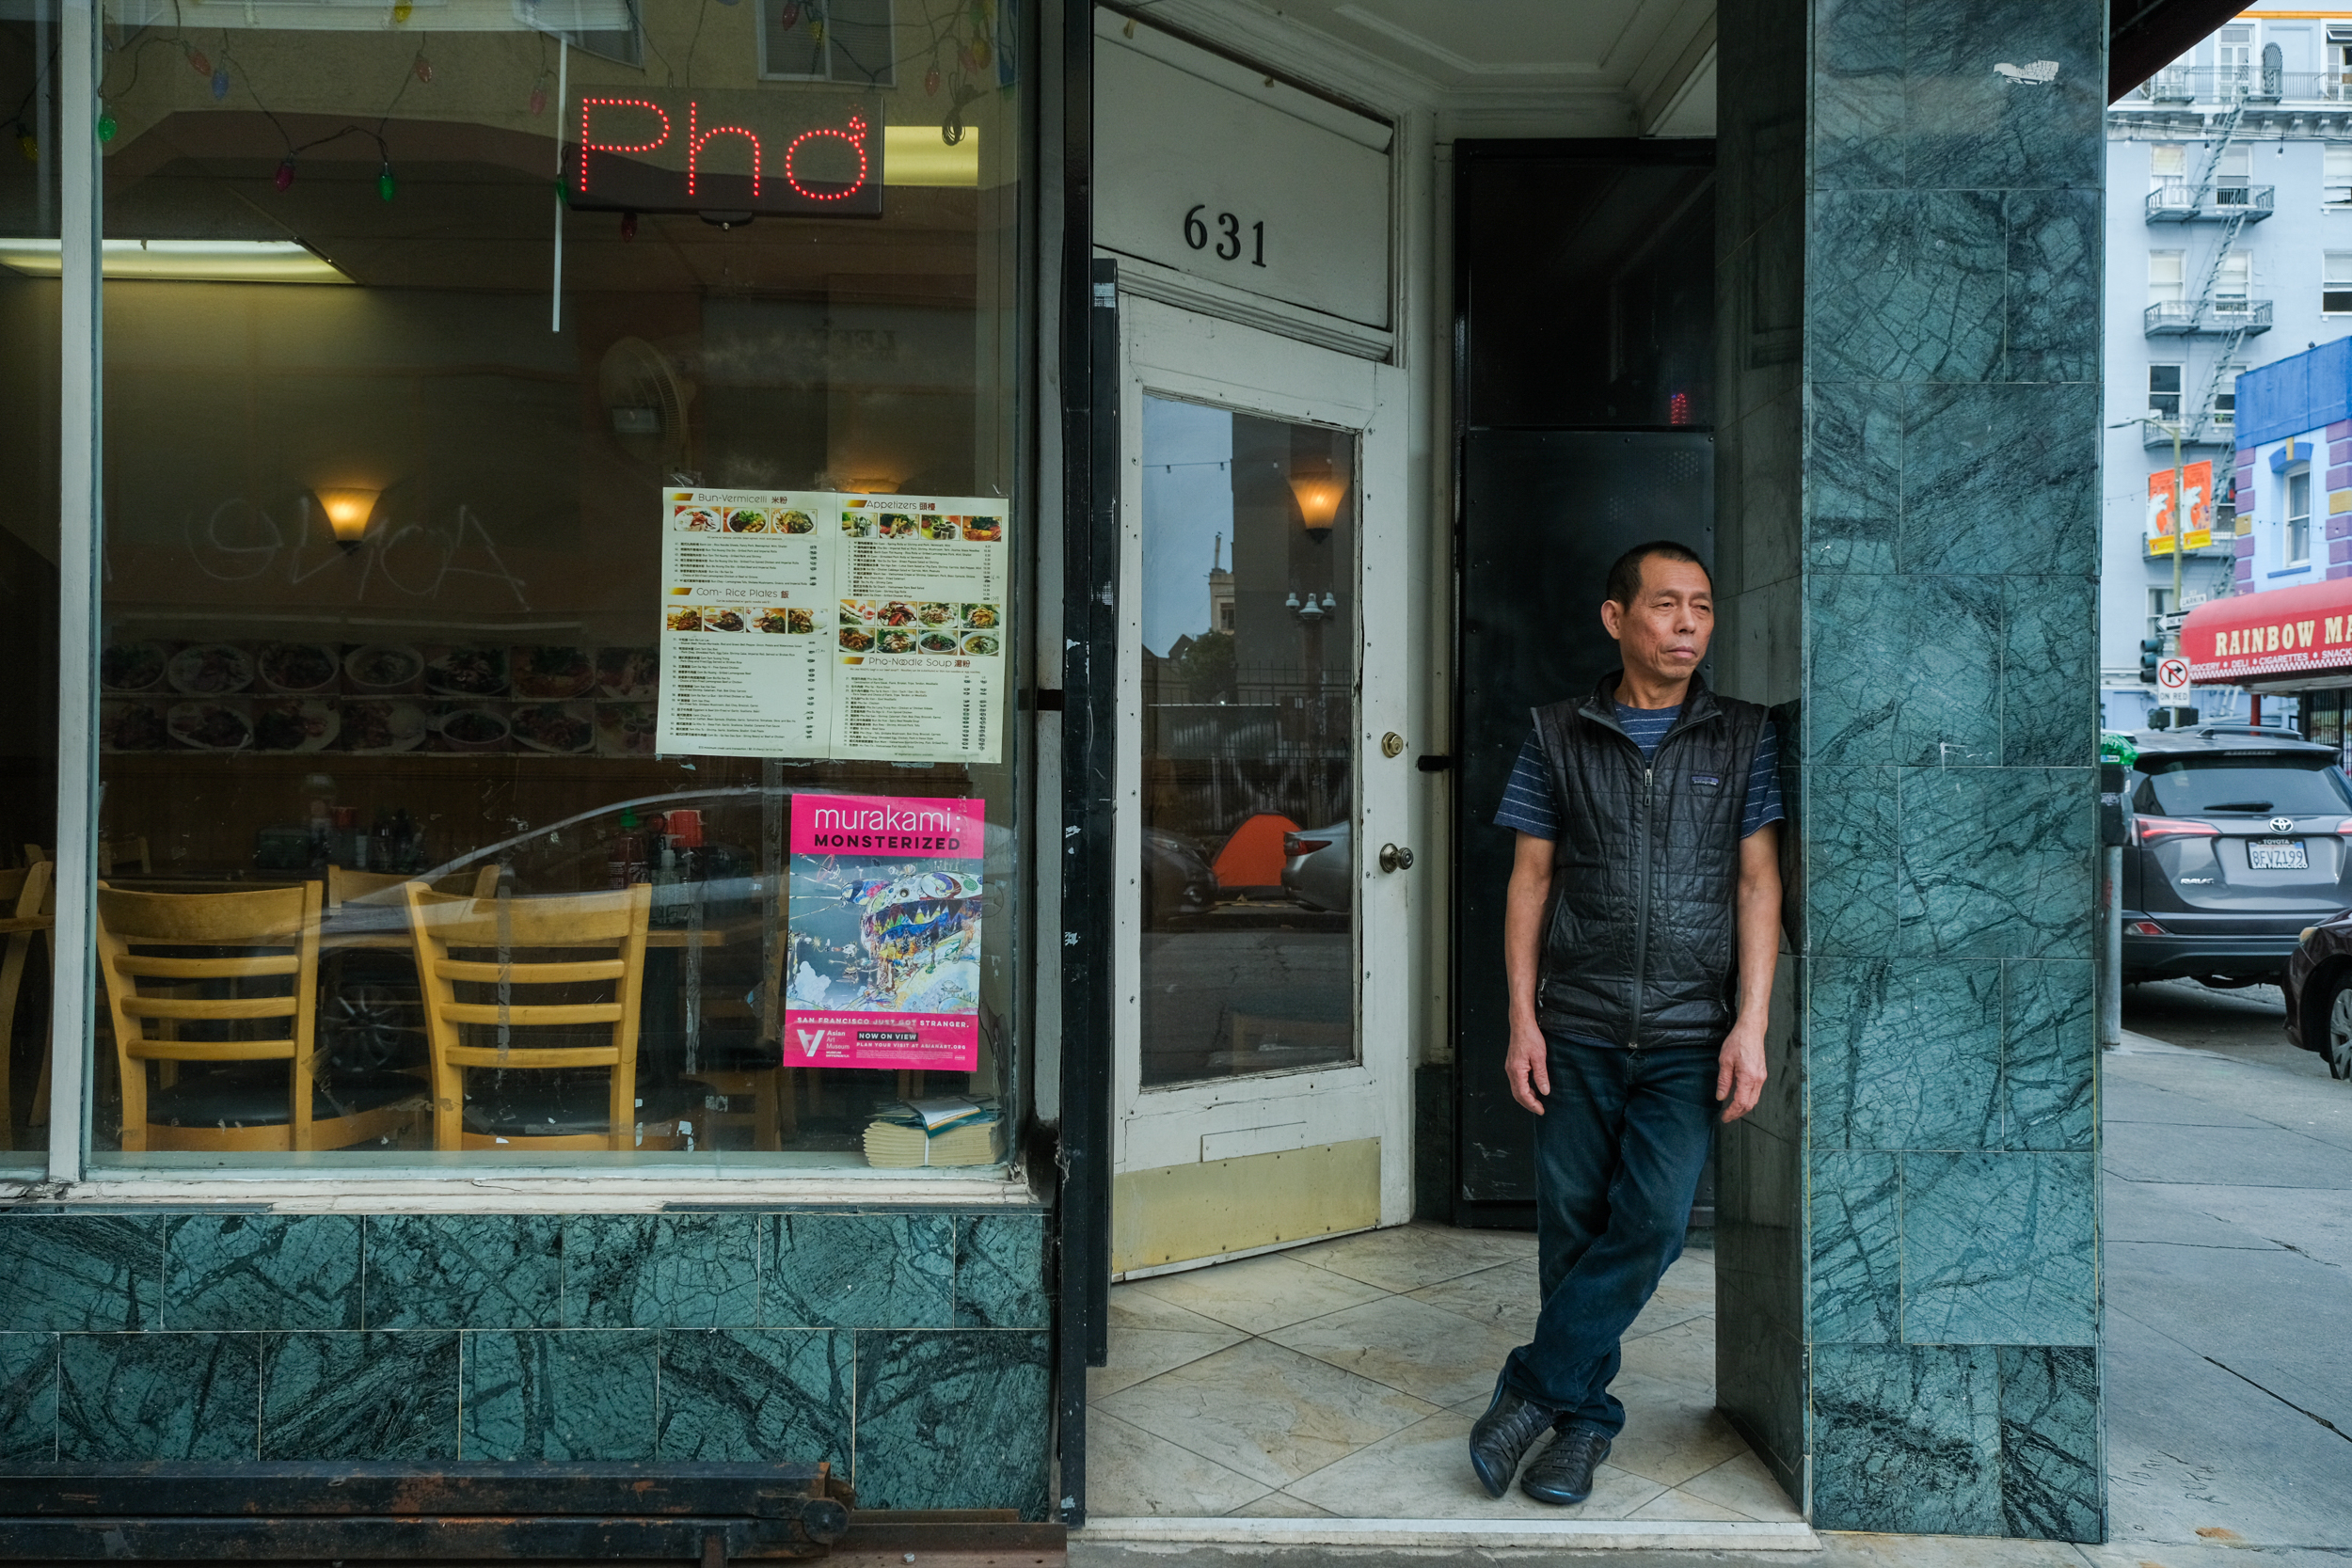 A man stands by an open door of a Pho restaurant, with a menu and a colorful sign in the window.